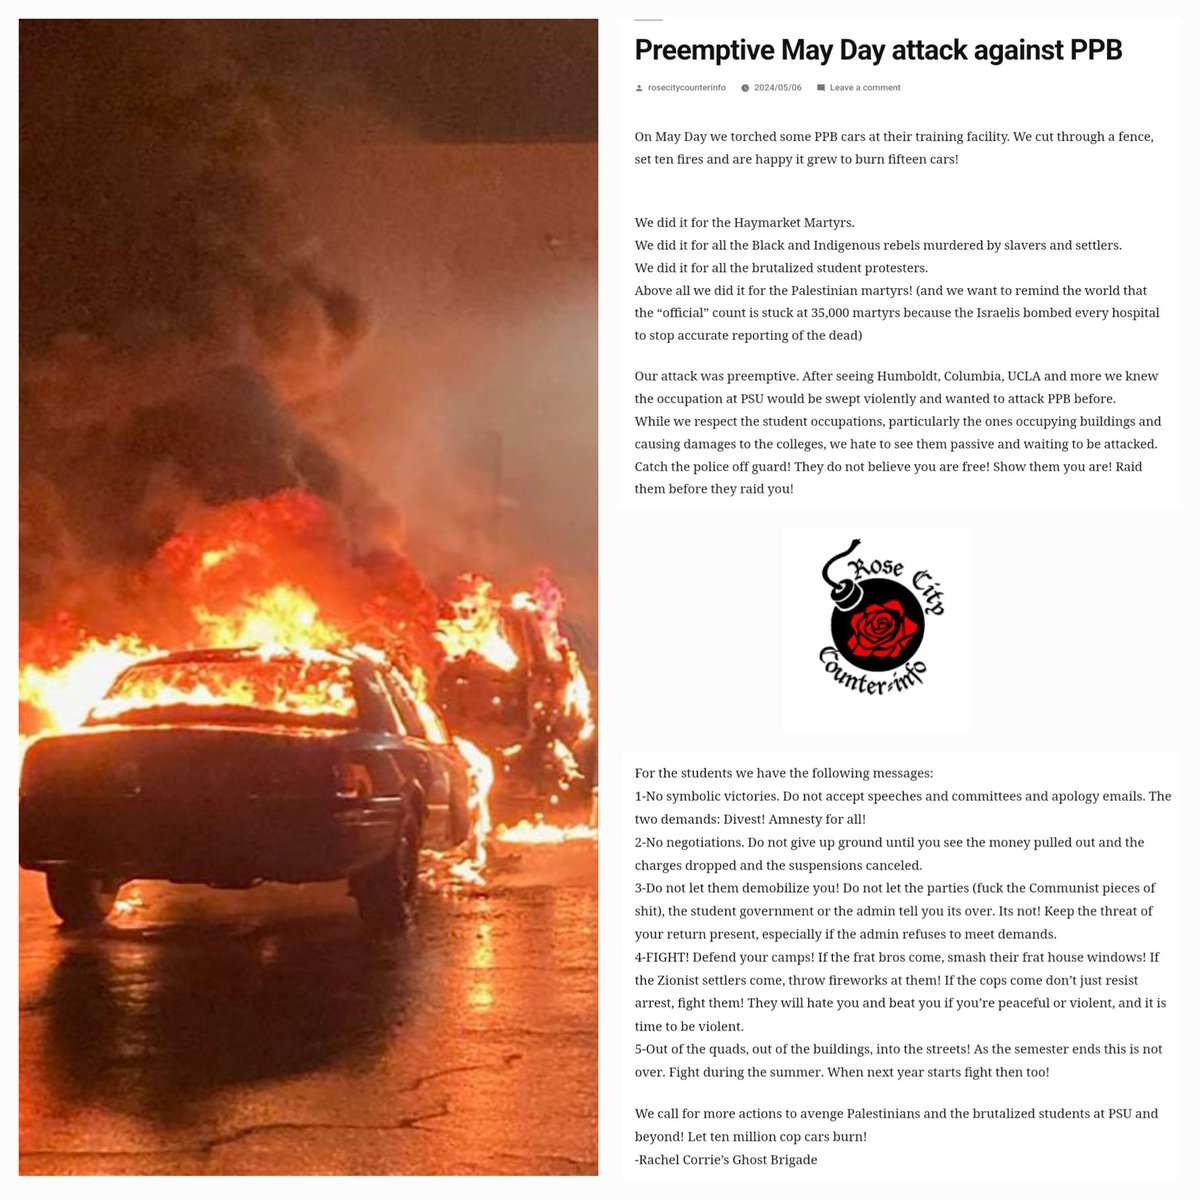 'We call for more actions to avenge Palestinians and the brutalized students at PSU and beyond! Let ten million cop cars burn! -Rachel Corrie’s Ghost Brigade'